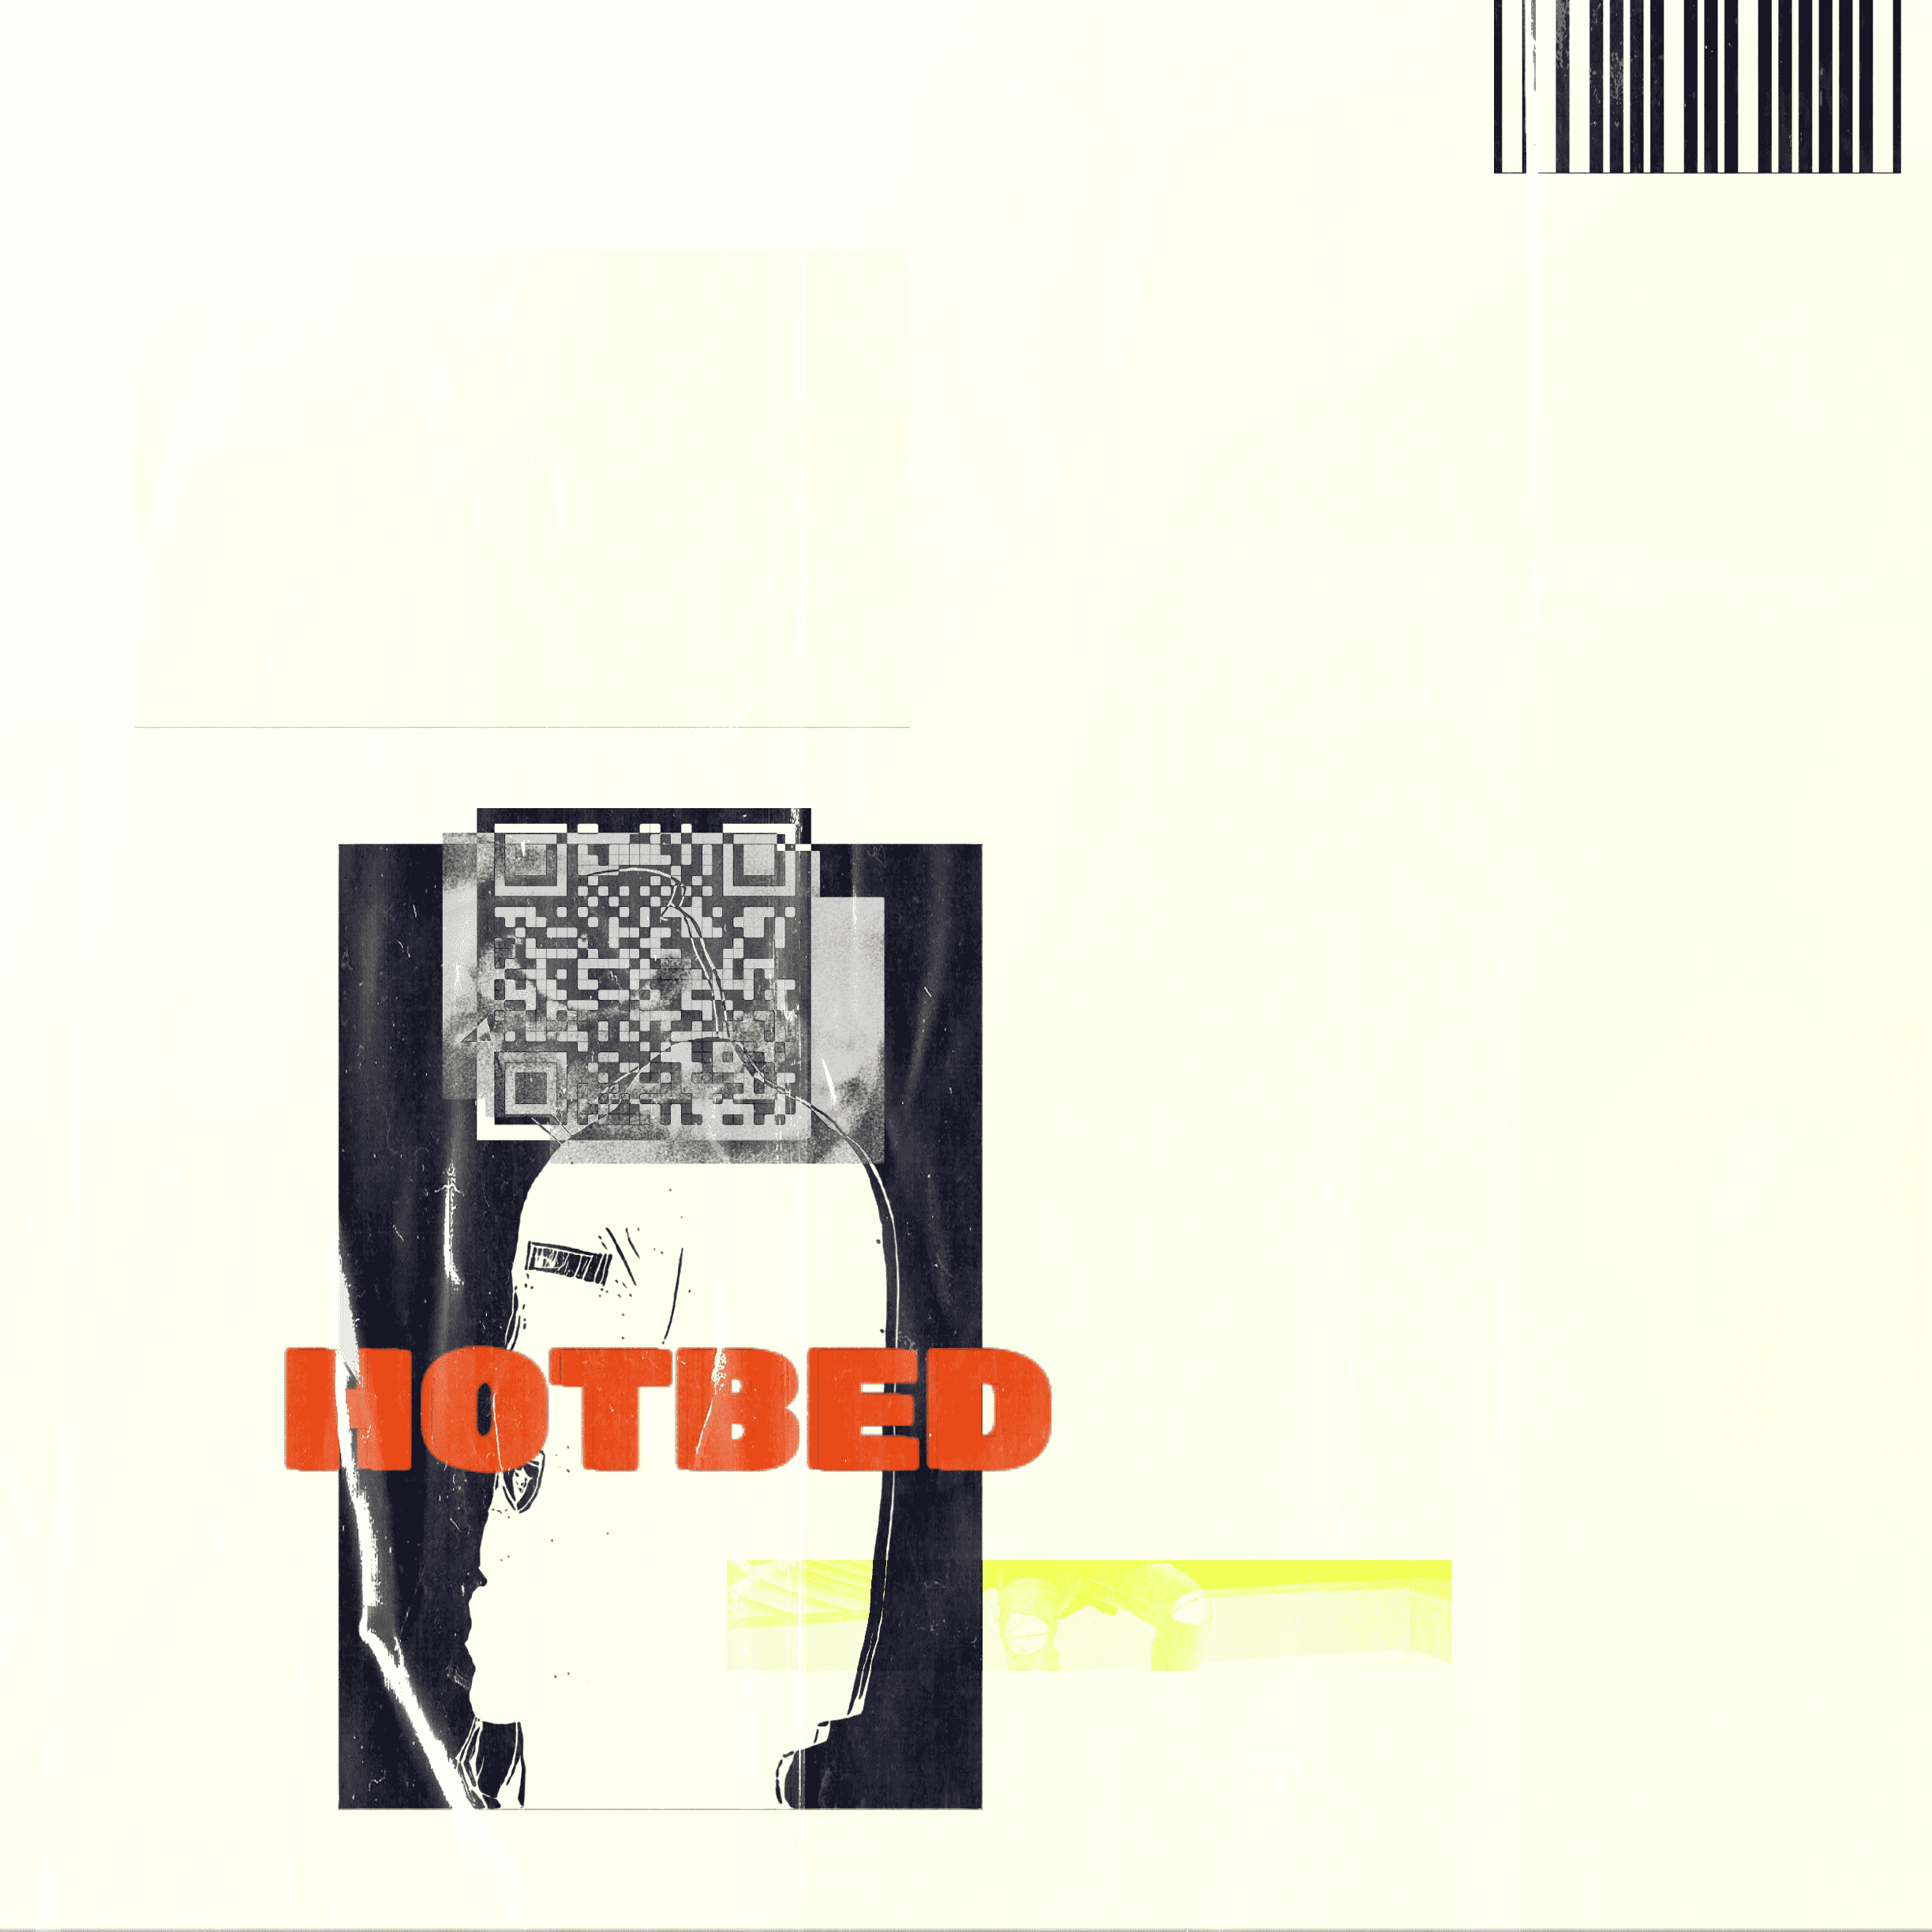 Cover art for bloody white's song: HOTBED